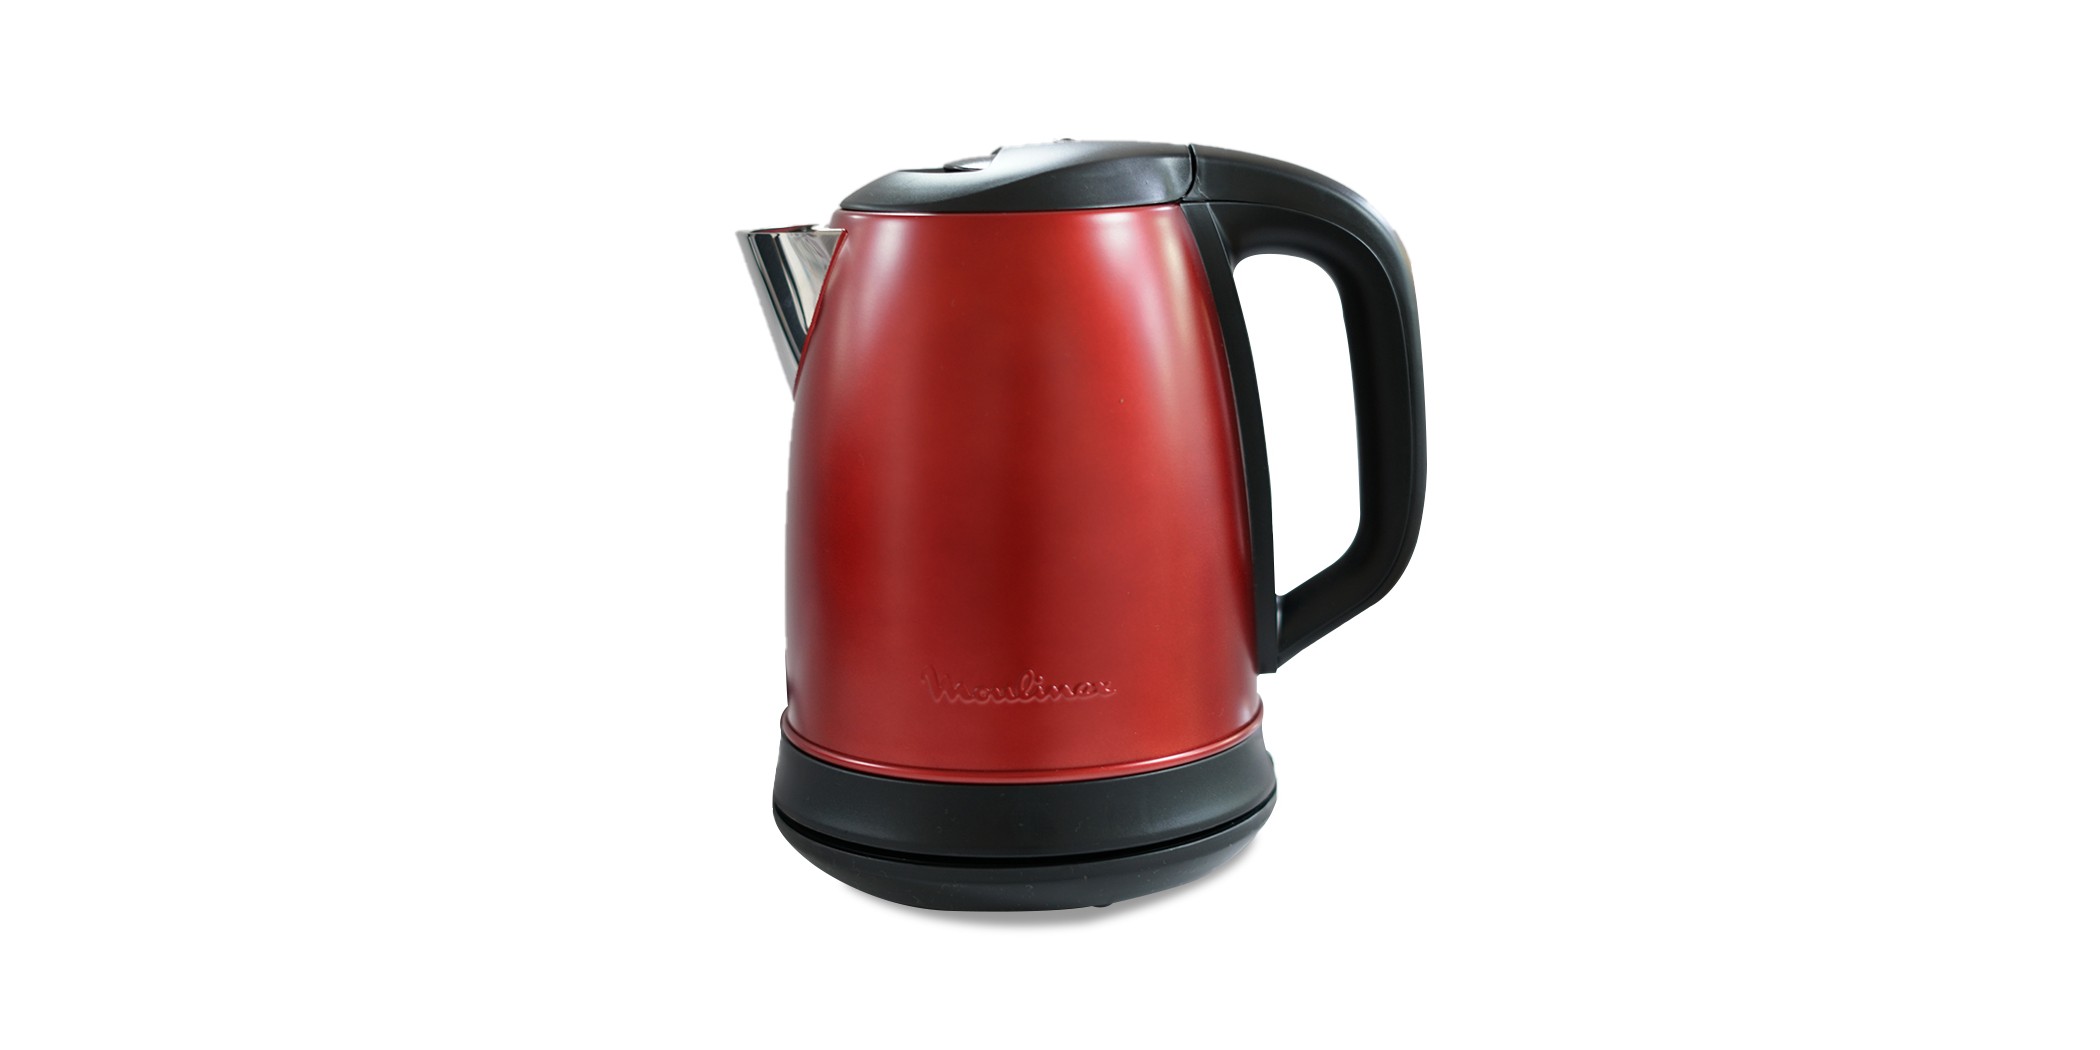 Moulinex BY550510 Subito 1.7L S/S Red Kettle